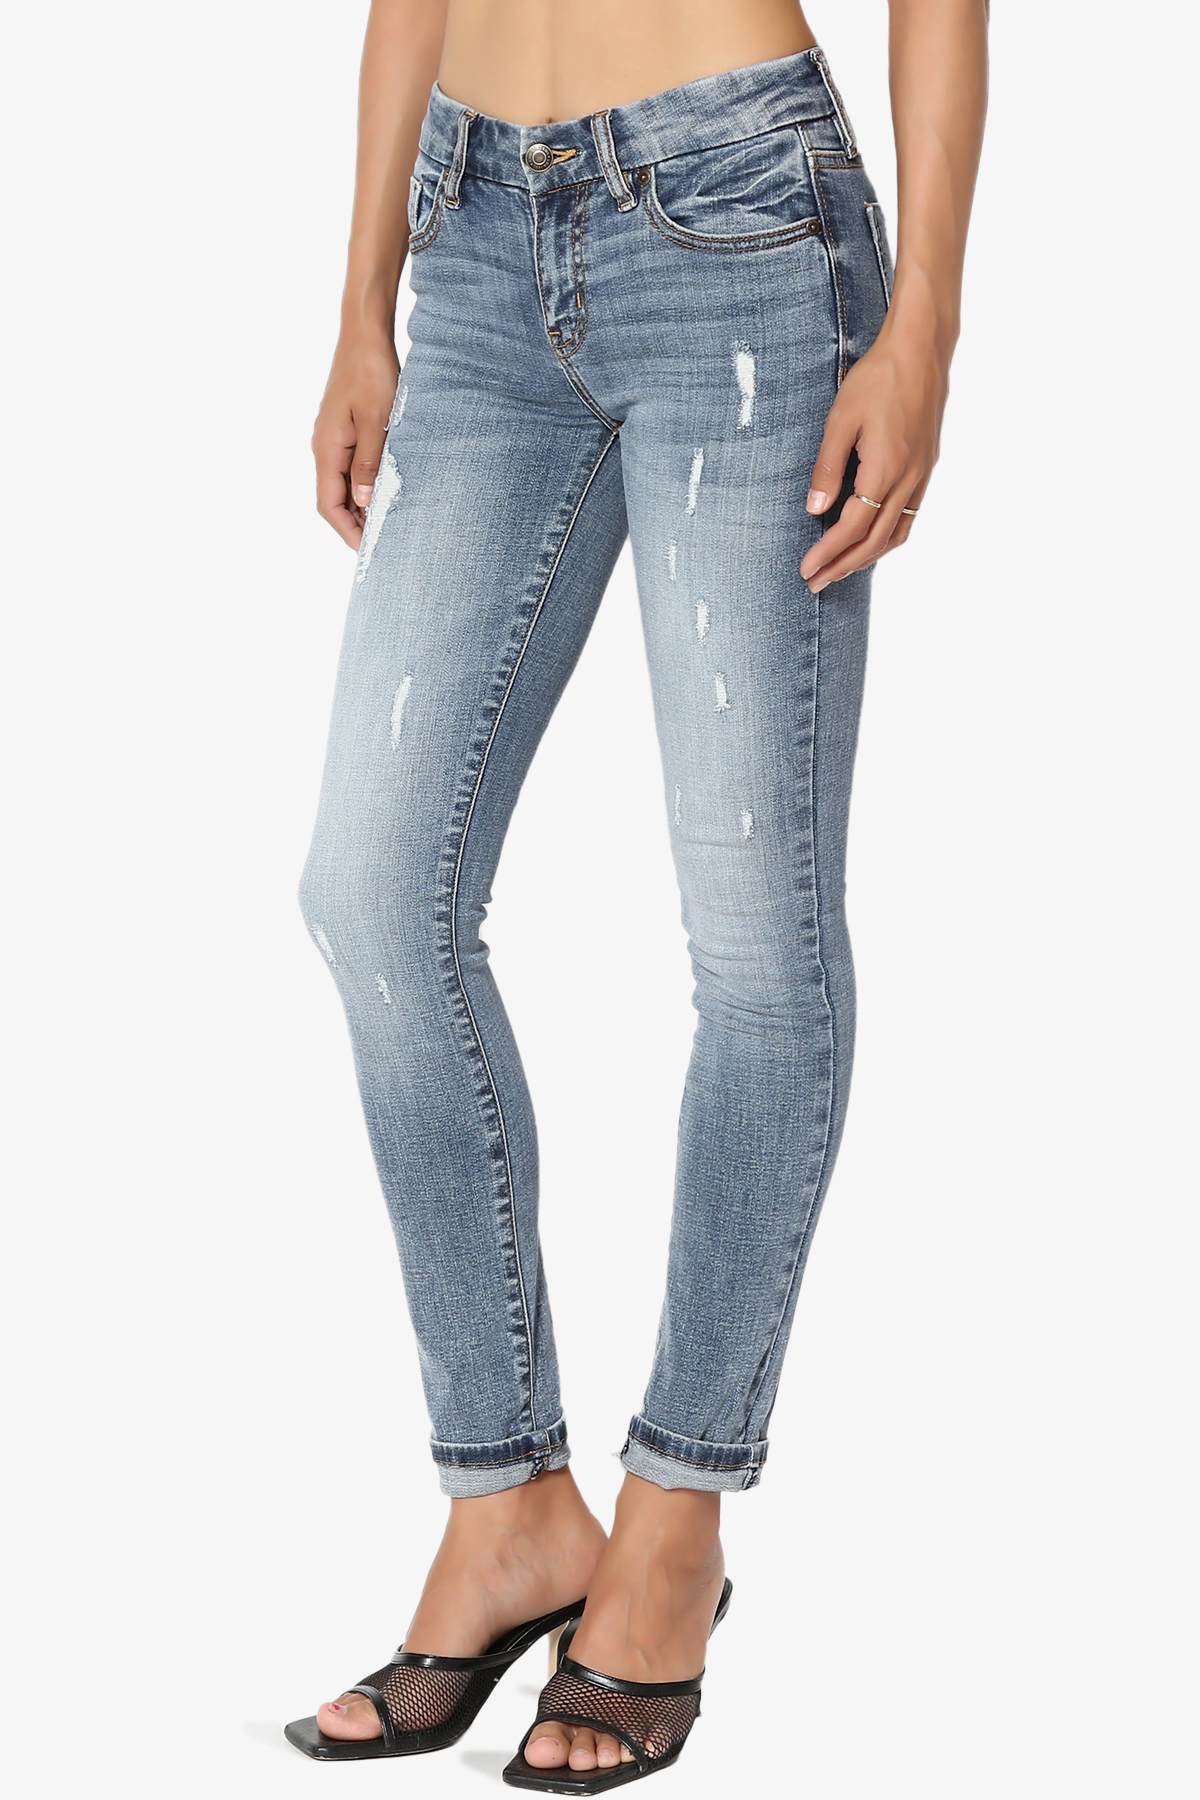 TheMogan Women's 0~3X Roll Up Mid Rise Med Vintage Wash Tencel Denim Skinny Jeans - image 3 of 7